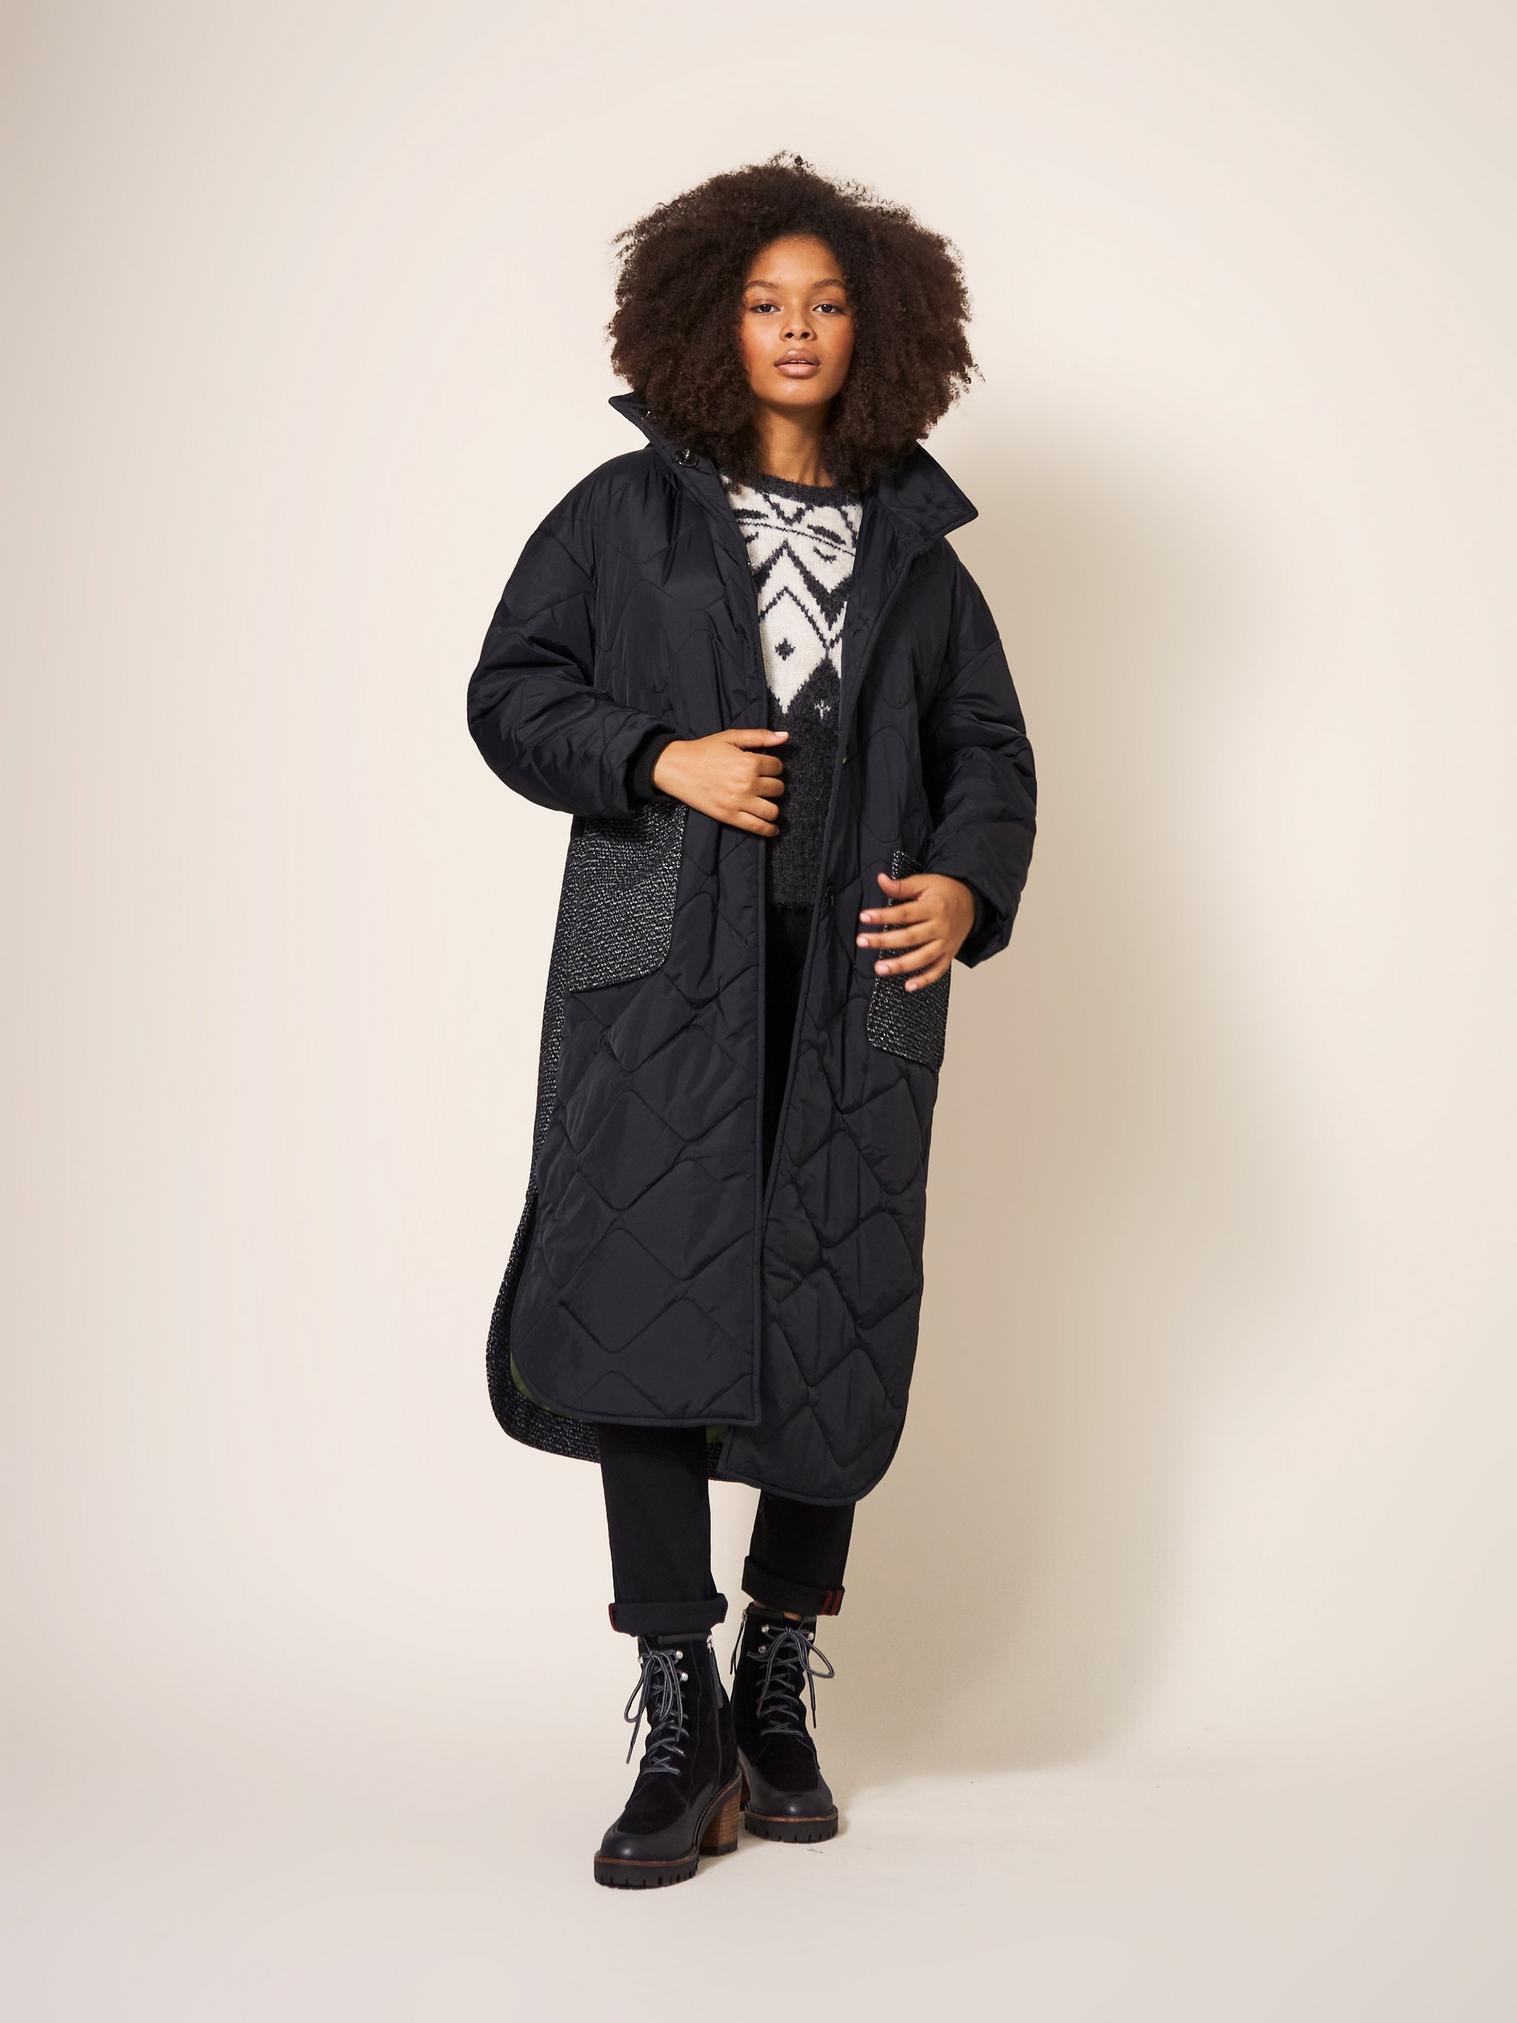 Luna Fabric Mix Quilted Coat in BLK MLT - LIFESTYLE